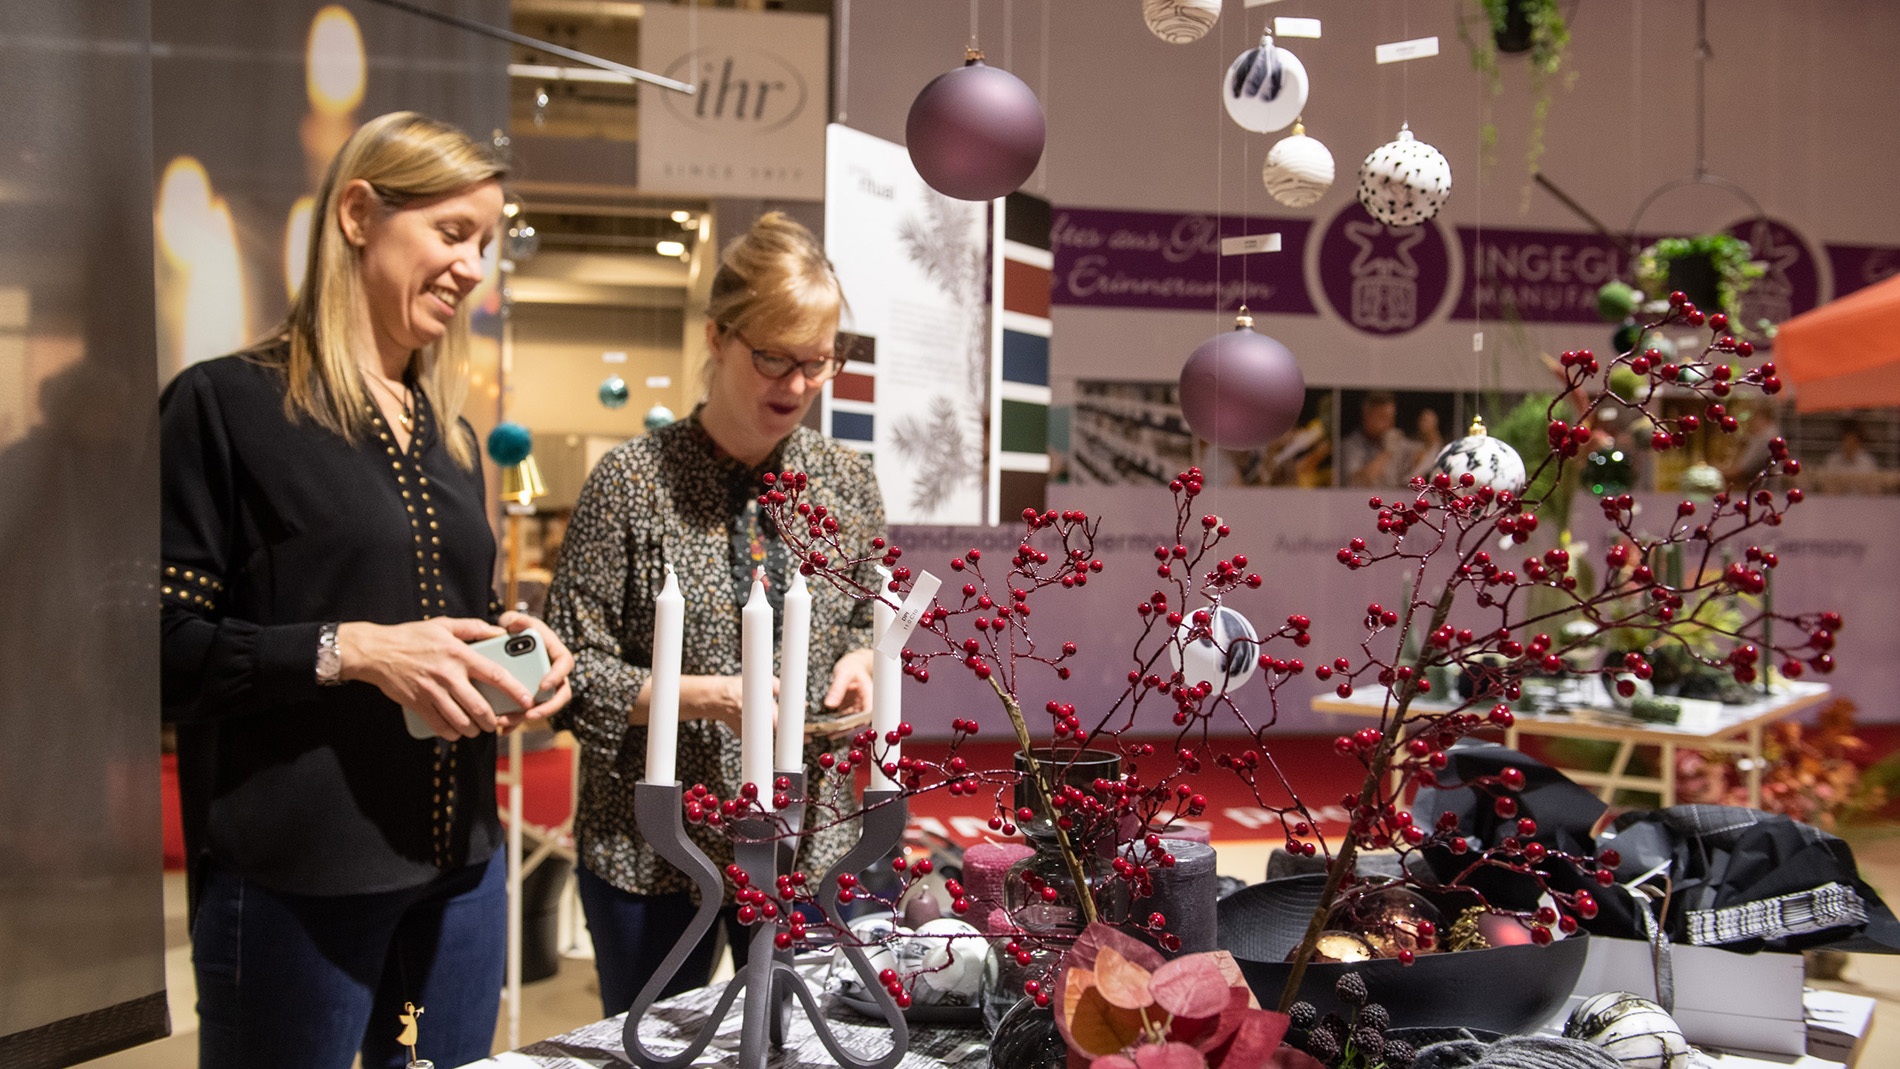 2 Women discover the decoration trends at Christmasworld